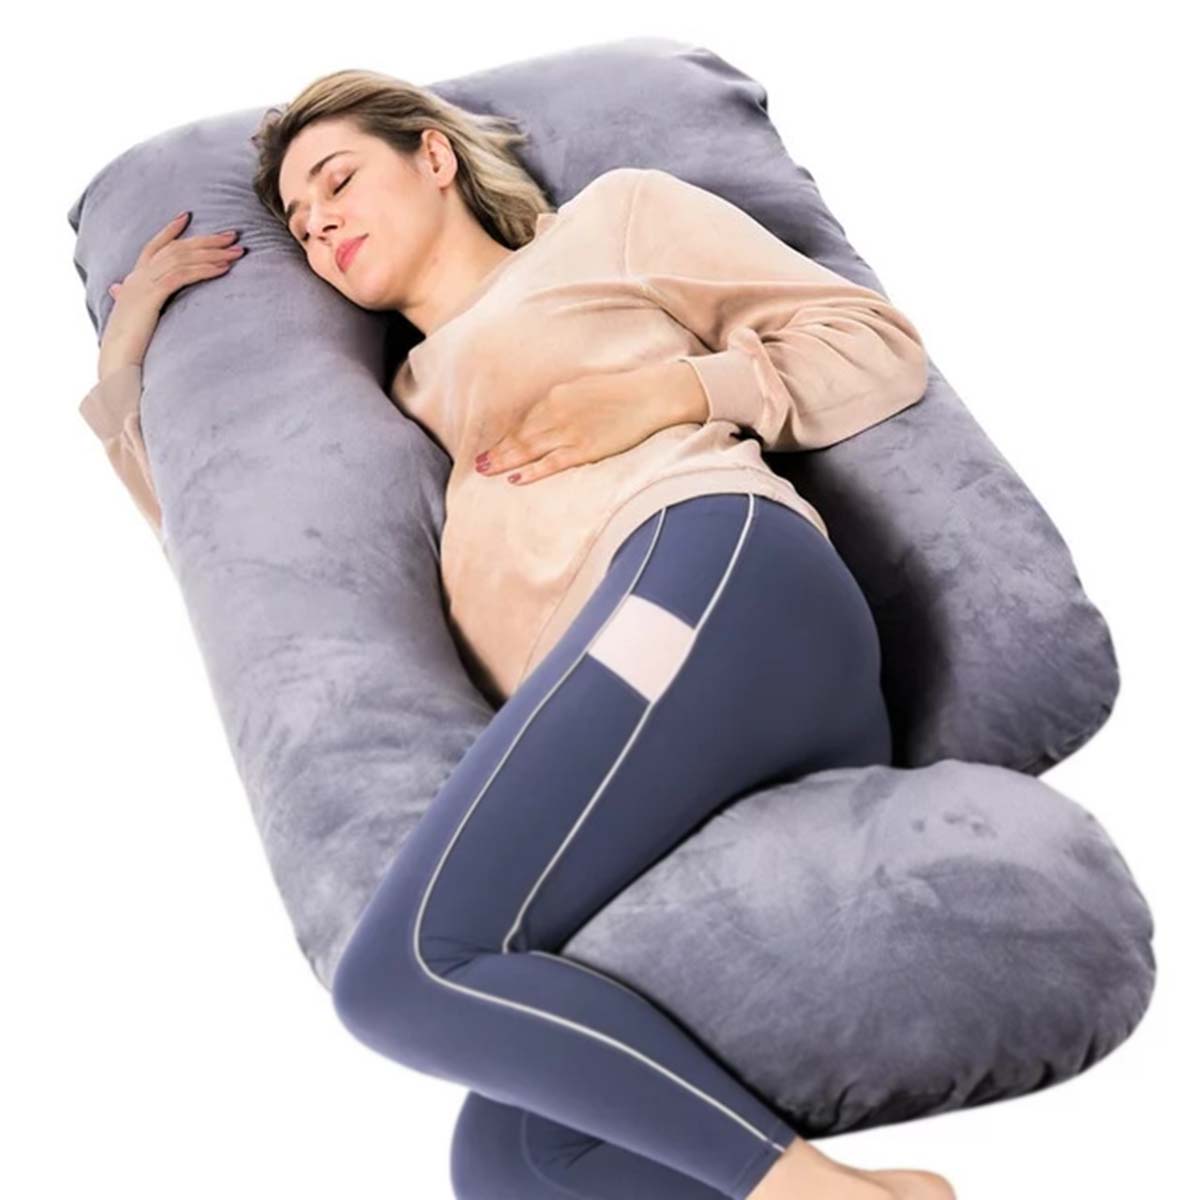 How Much Are Pregnancy Pillows